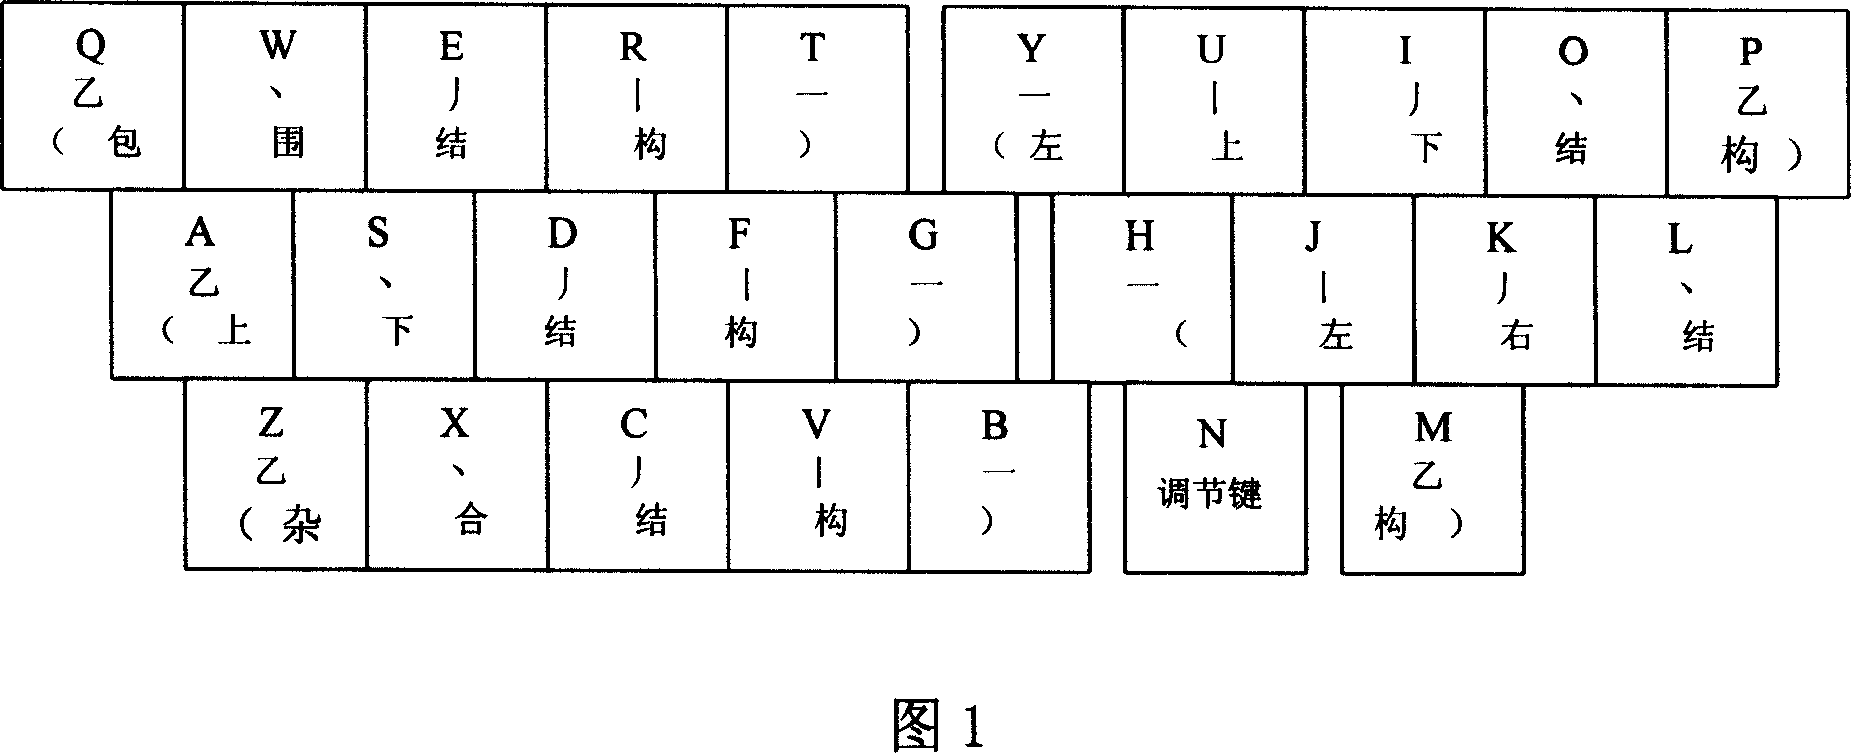 5-stroke input method and its keyboard